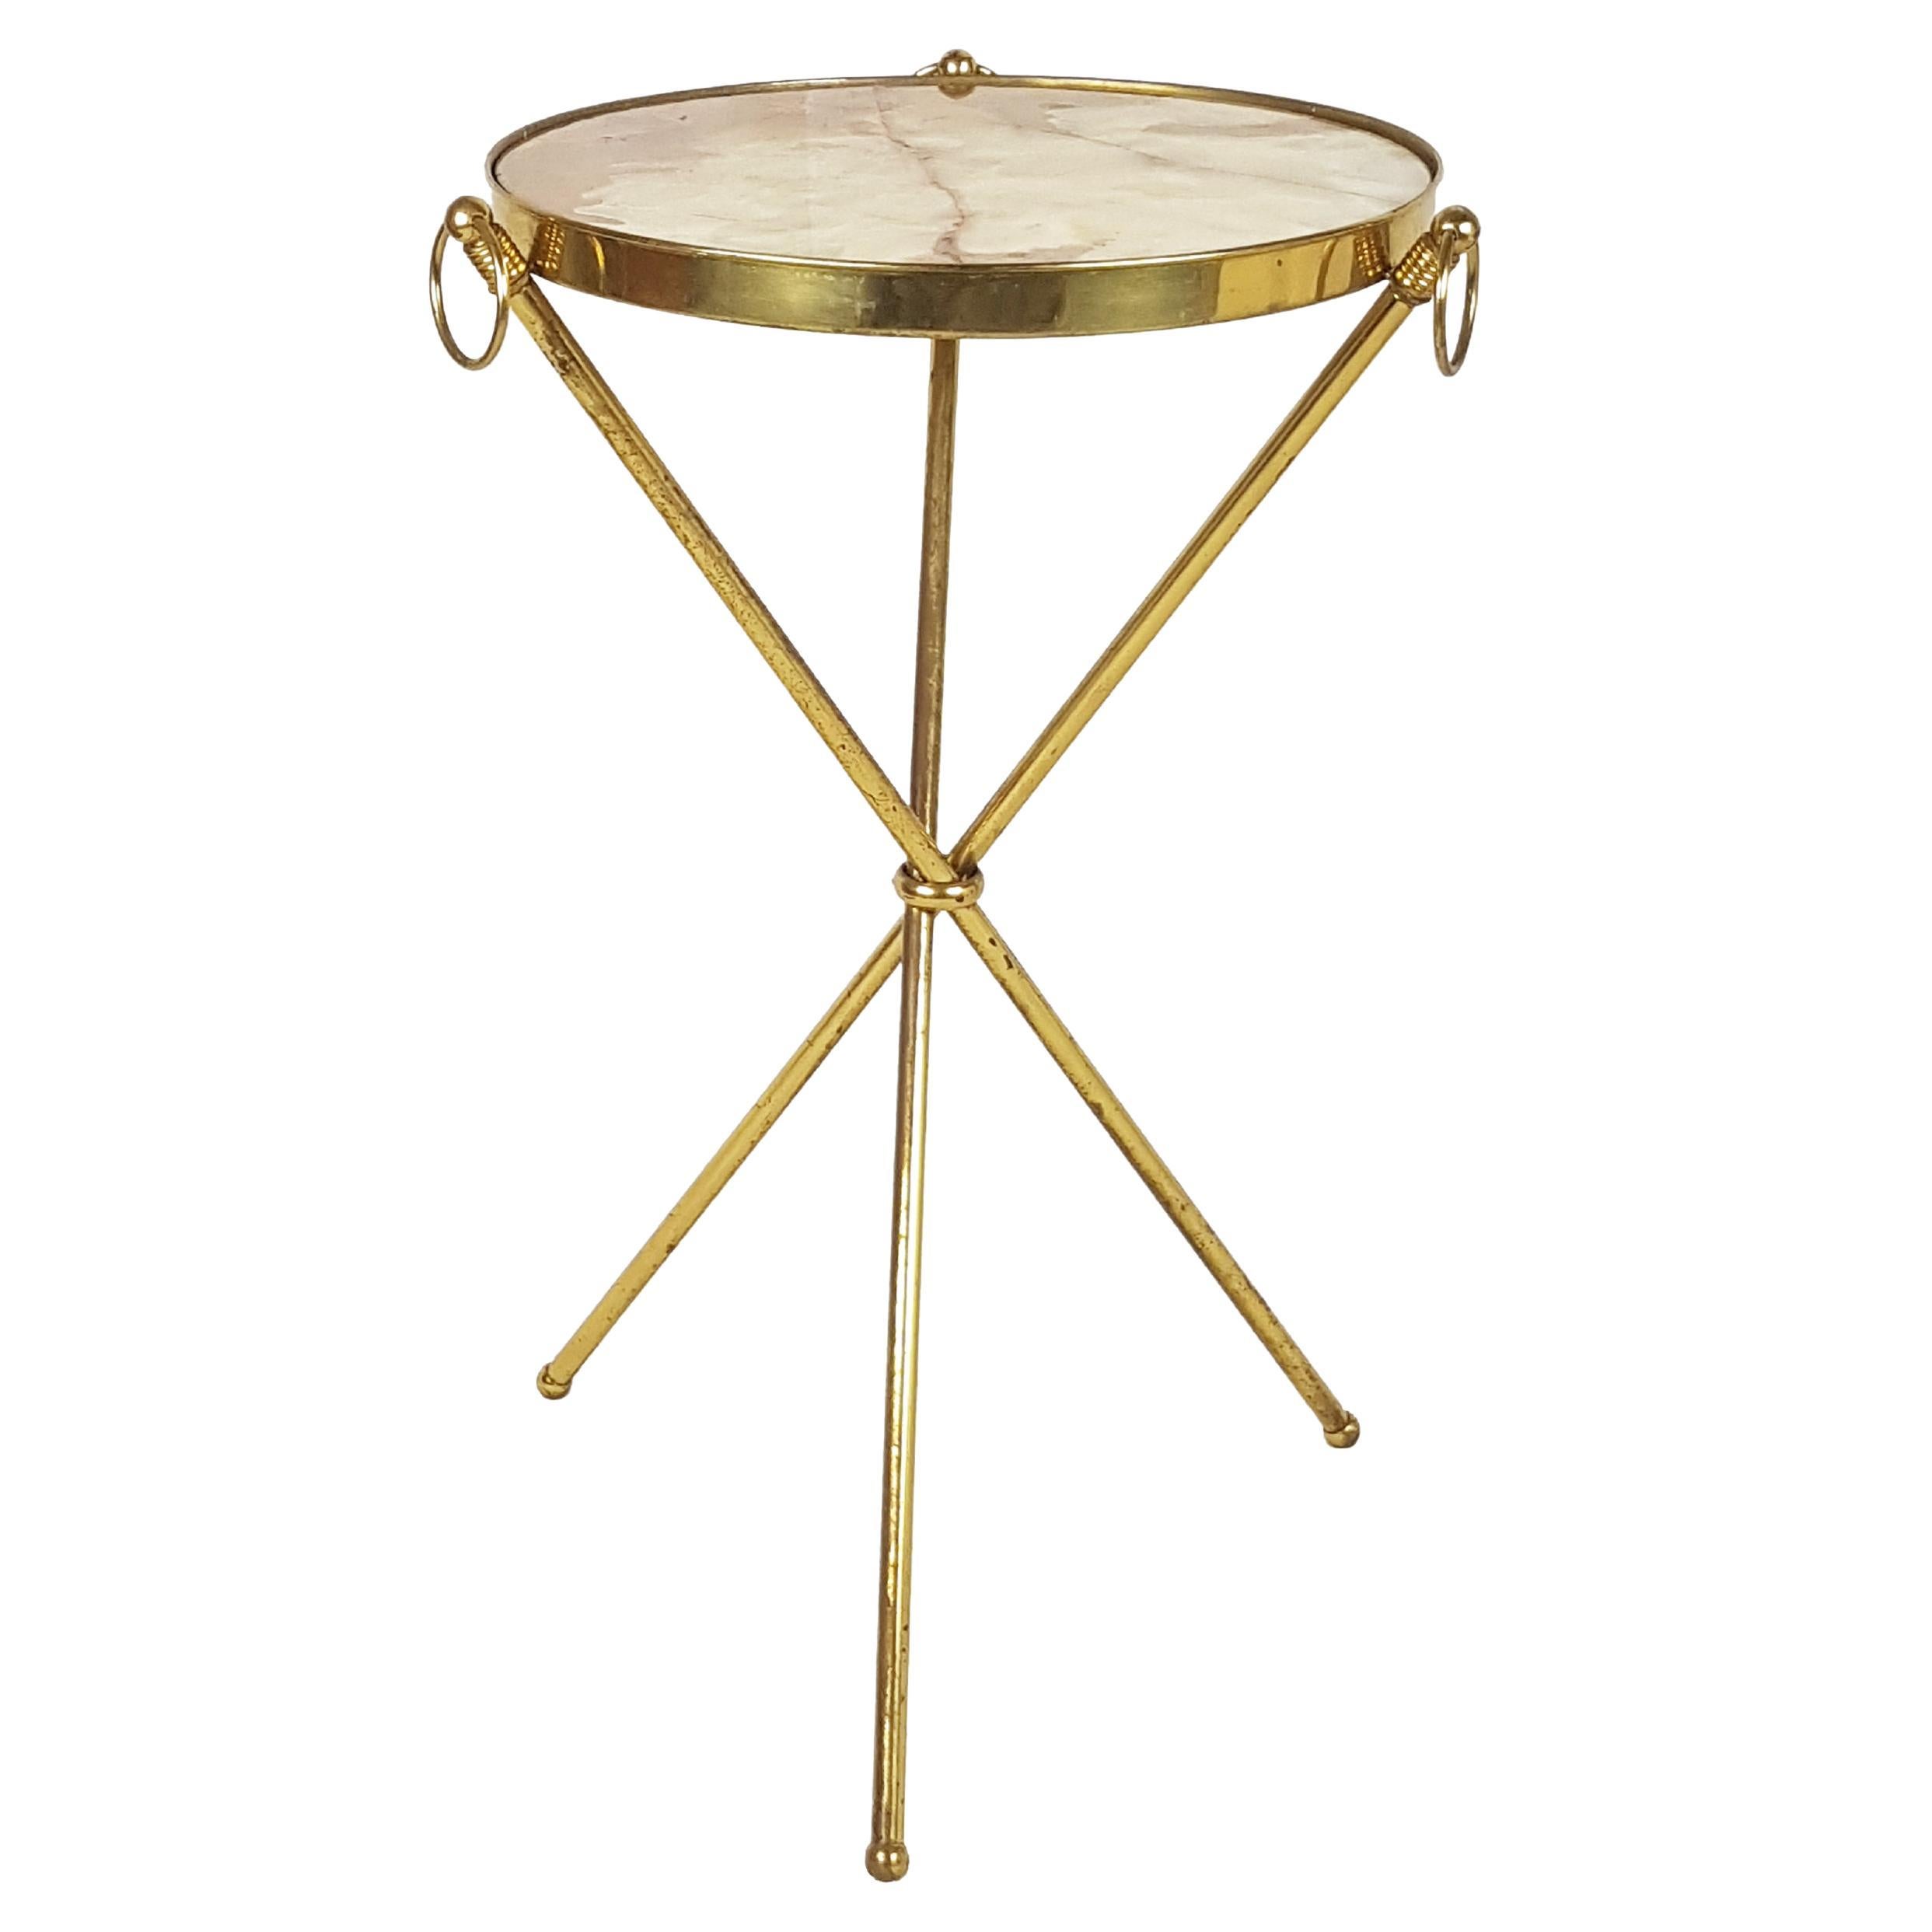 Italian Marble & brass 1950s occasional table by J. Brizzi